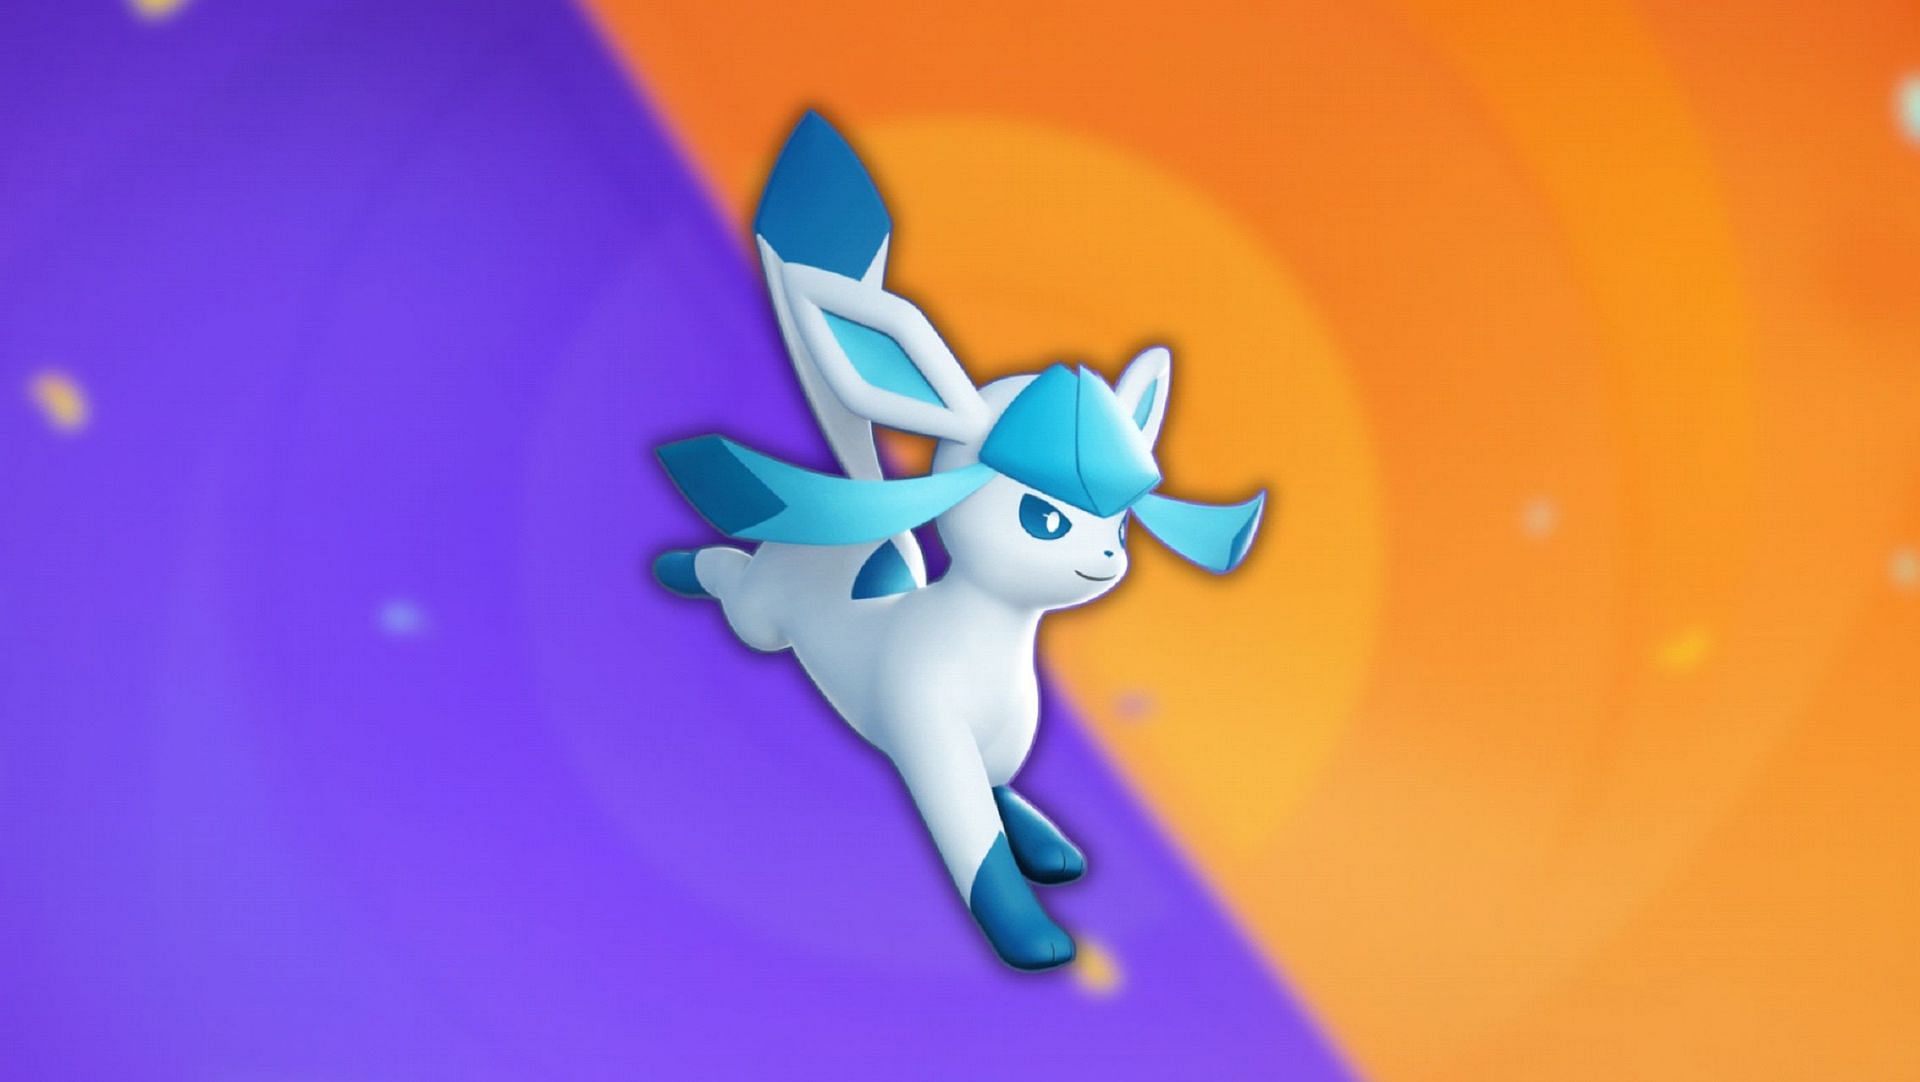 Glaceon in the game (Image via The Pokemon Company)